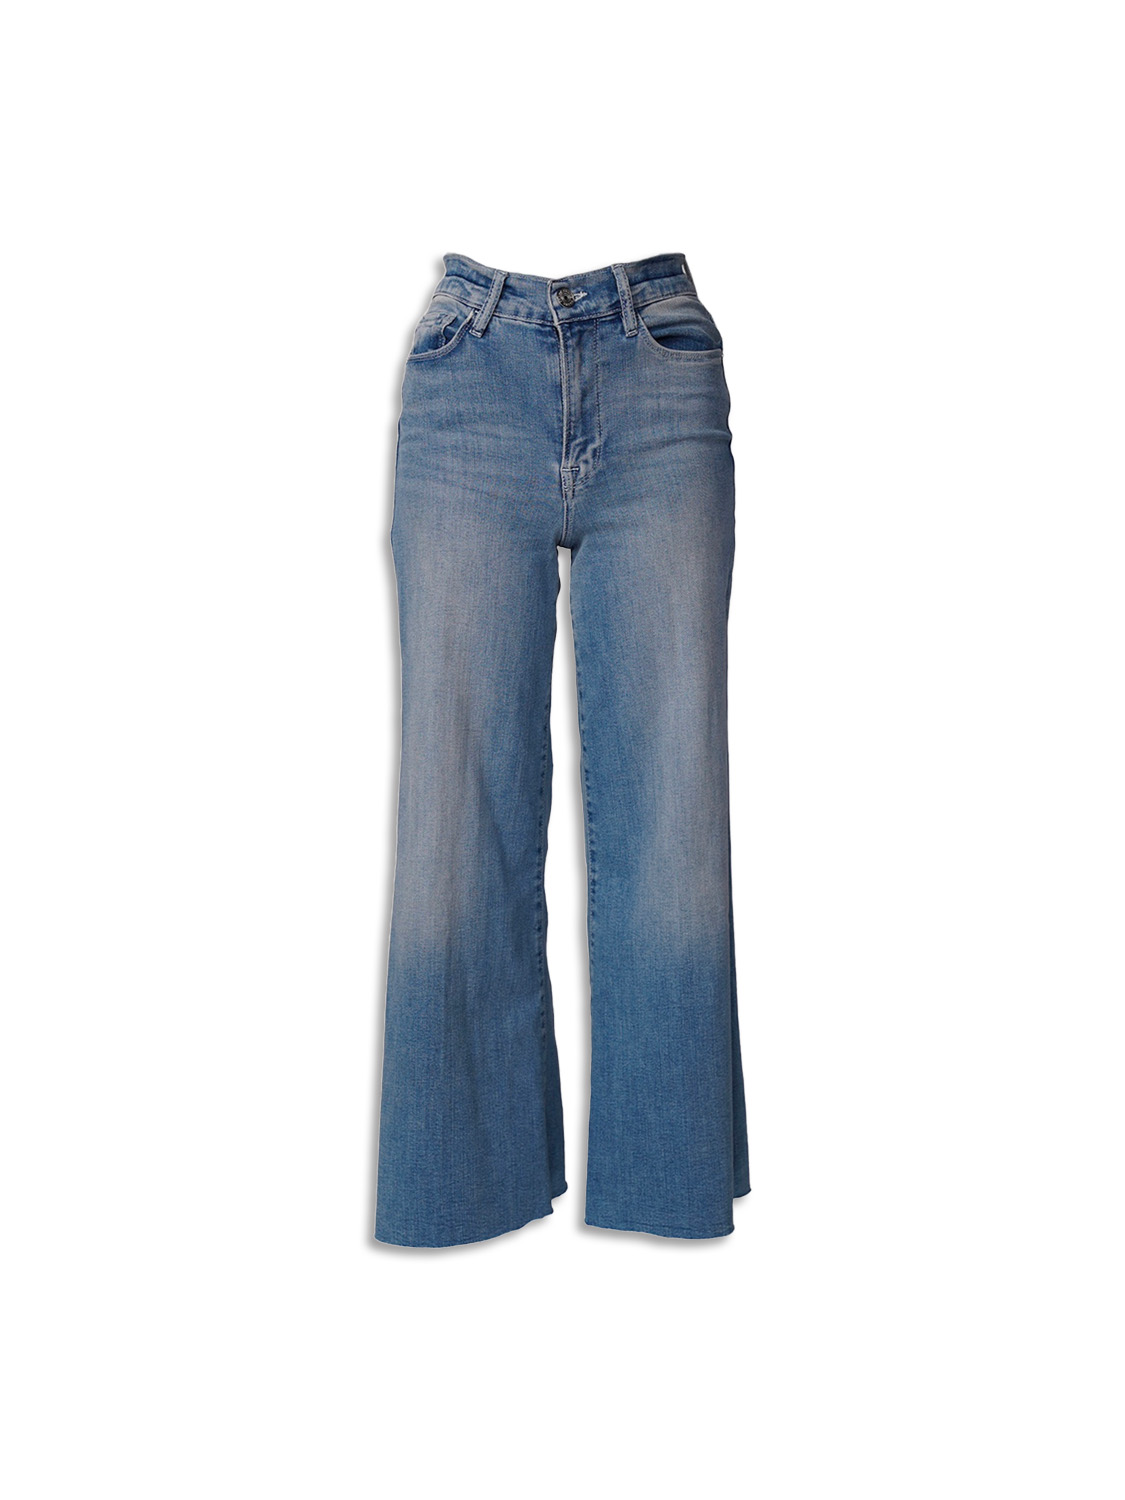 Le Palazzo Crop - Jeans pants with wide flared leg